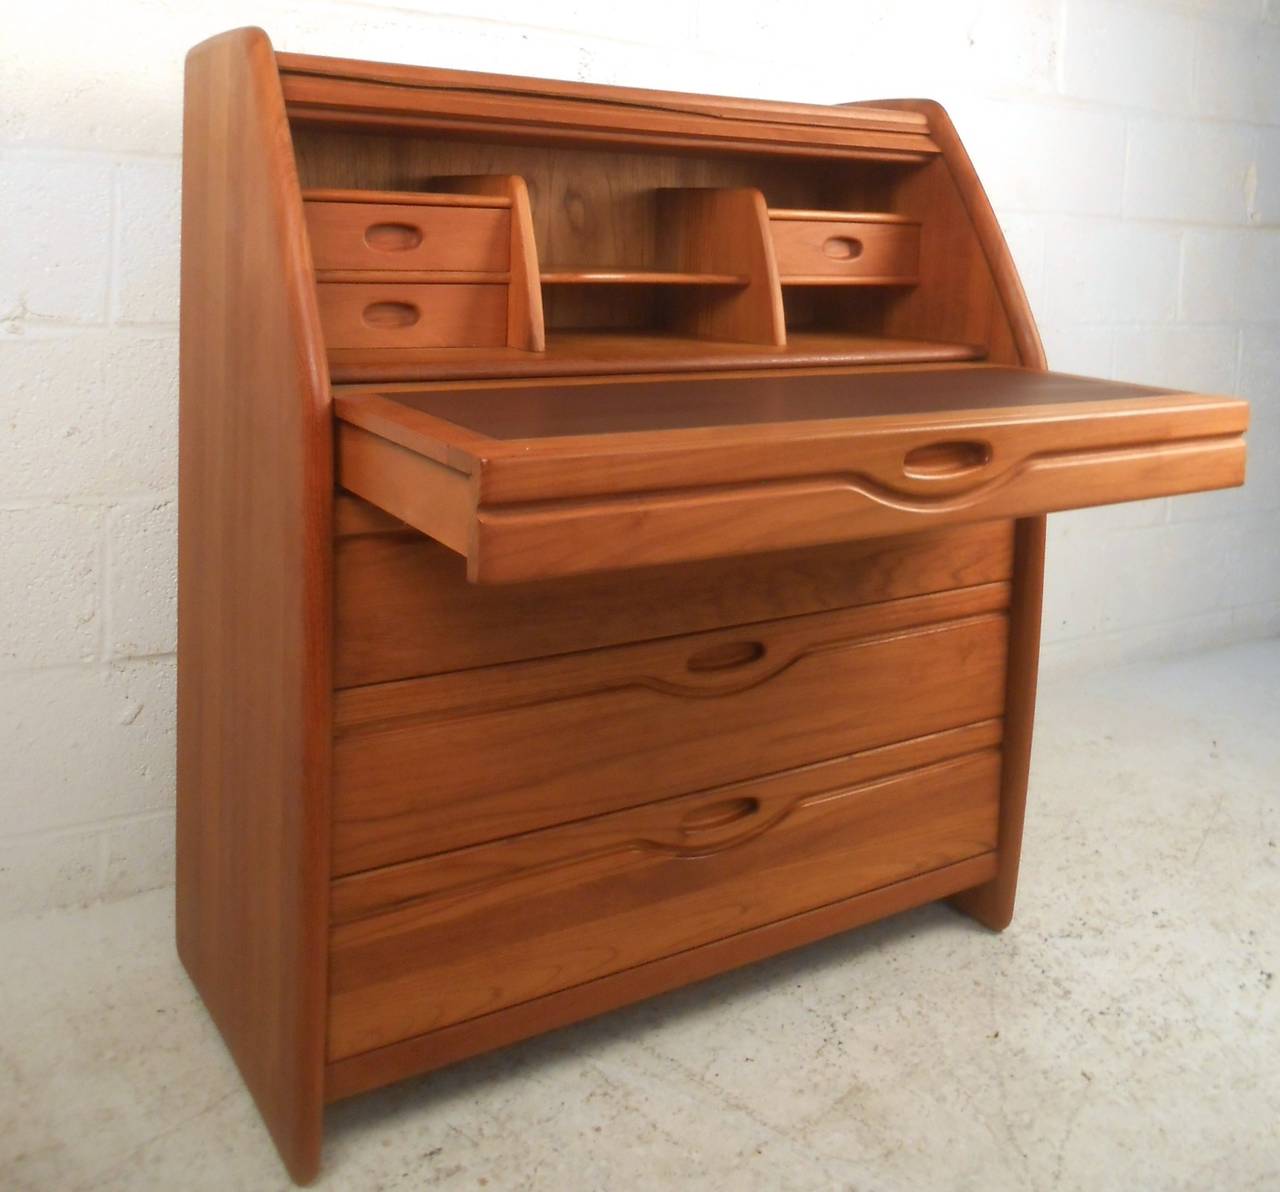 This vintage roll top desk offers a stylish collapsible workspace with plenty of added room for storage. Tight and compact, this desk is perfect for an apartment or small office, plenty of added organizational options behind roll up door. Please